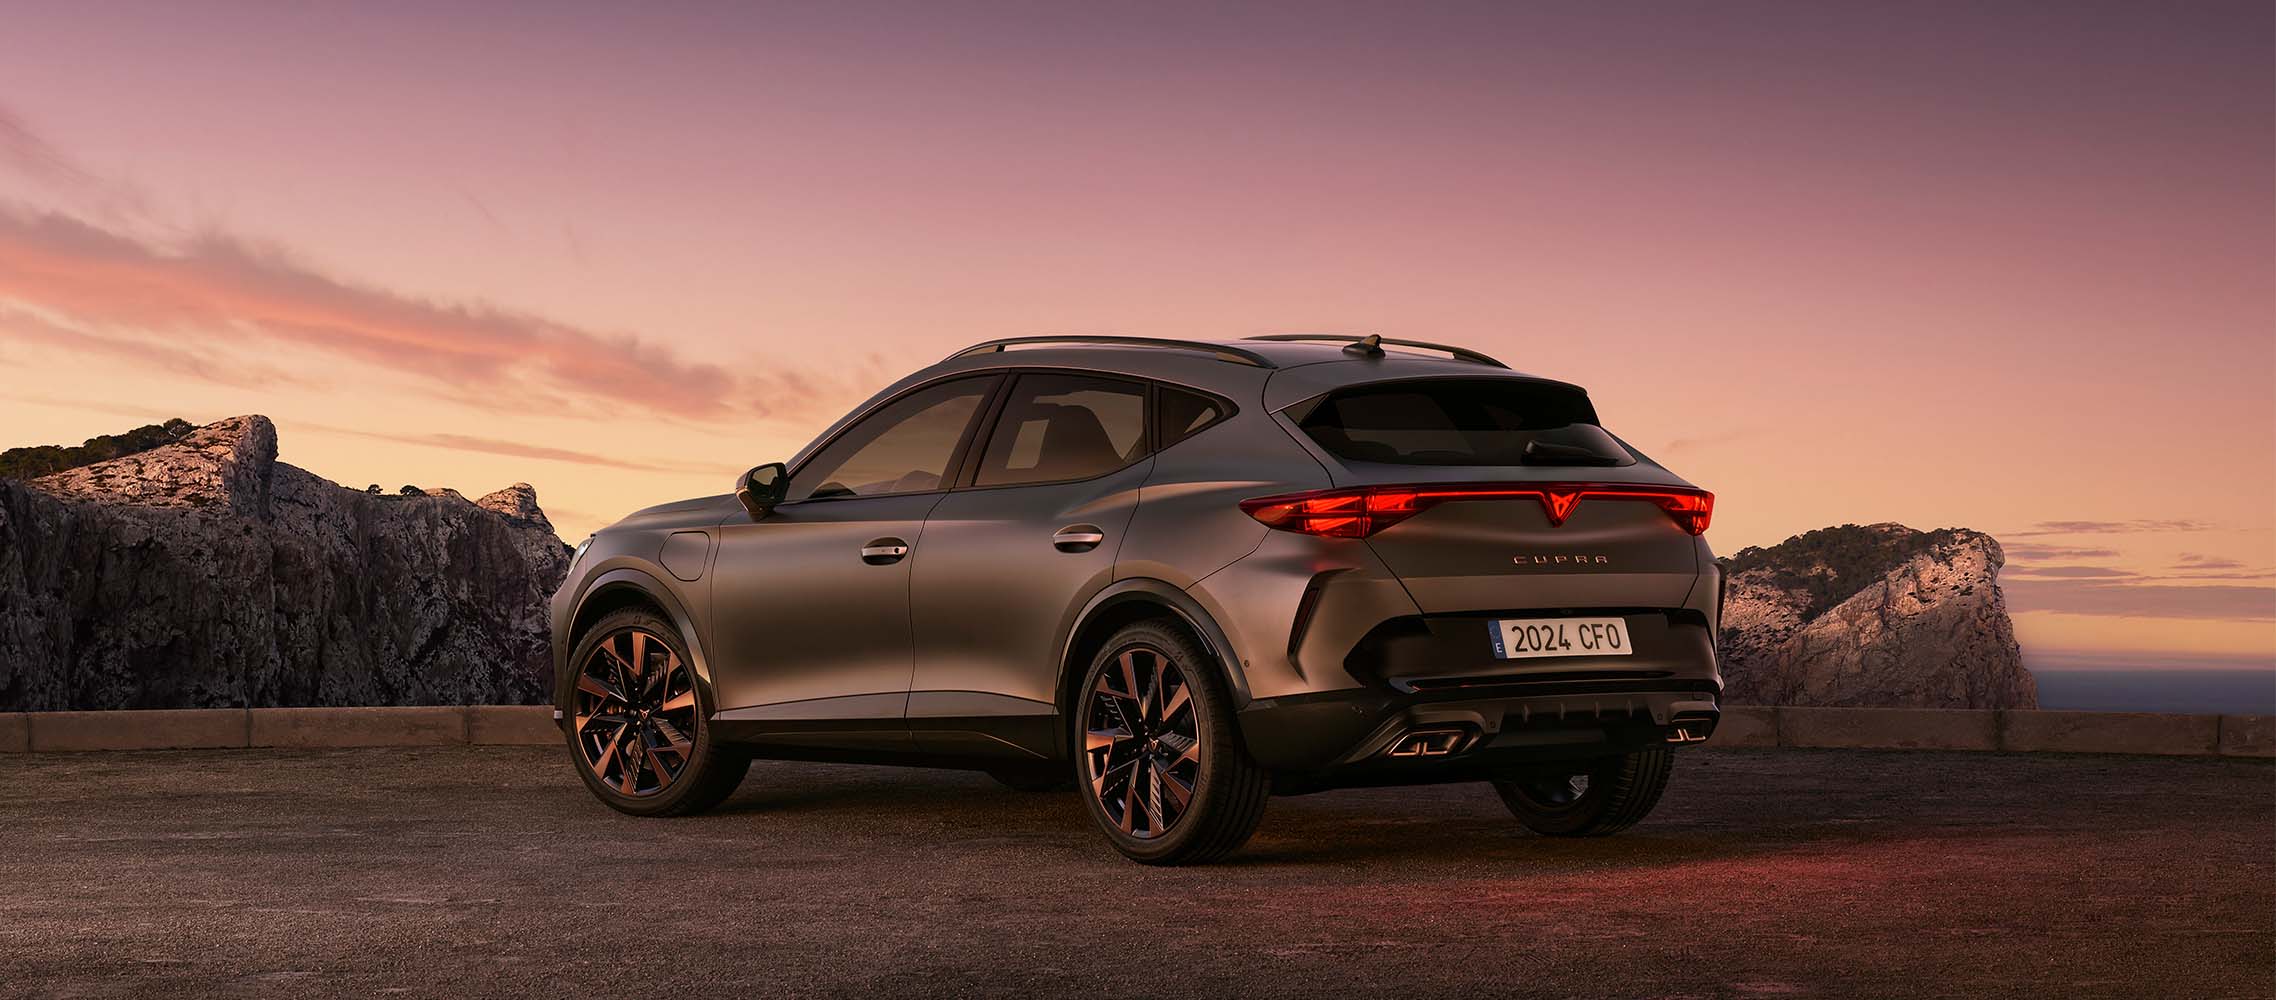 The 2024 CUPRA Formentor parked on a gravel road at sunset, showcasing its sleek metallic grey body and sporty design.